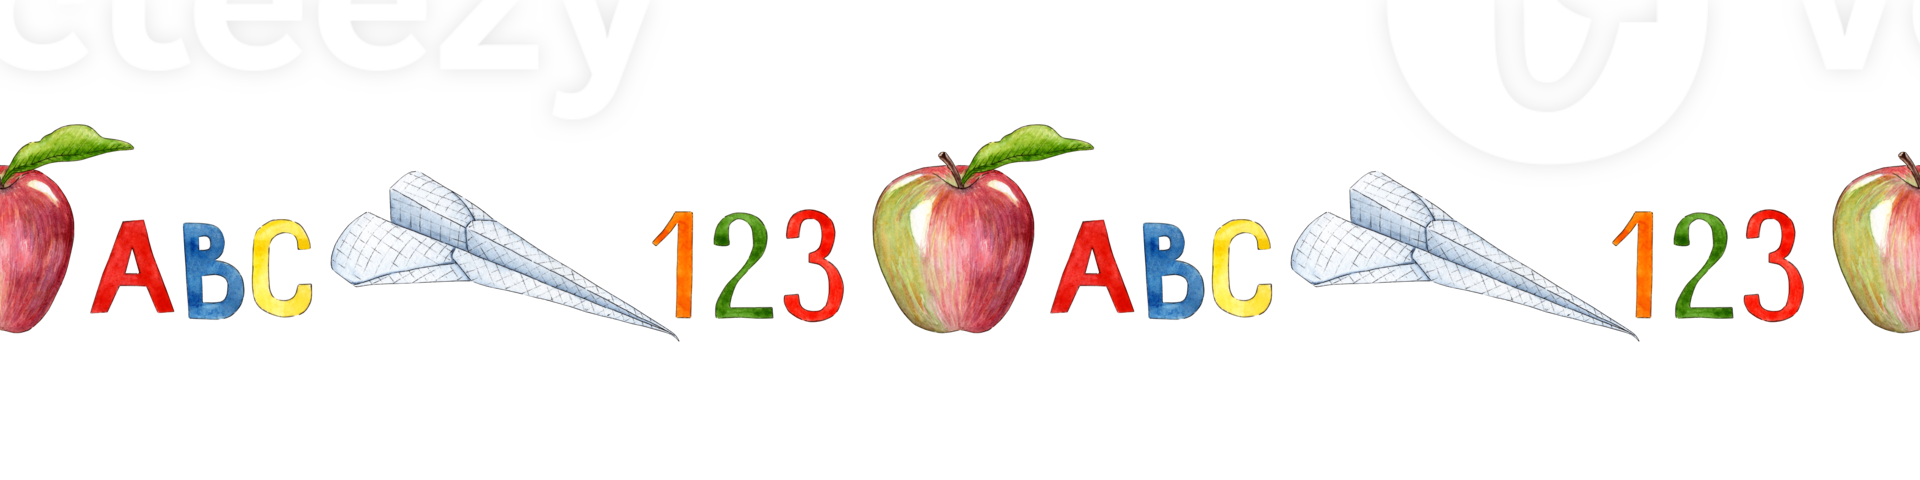 Watercolor horizontal seamless pattern school supplies numbers 123, letters ABC, rose apple, paper airplane. Back to school. Isolated, hand drawn png